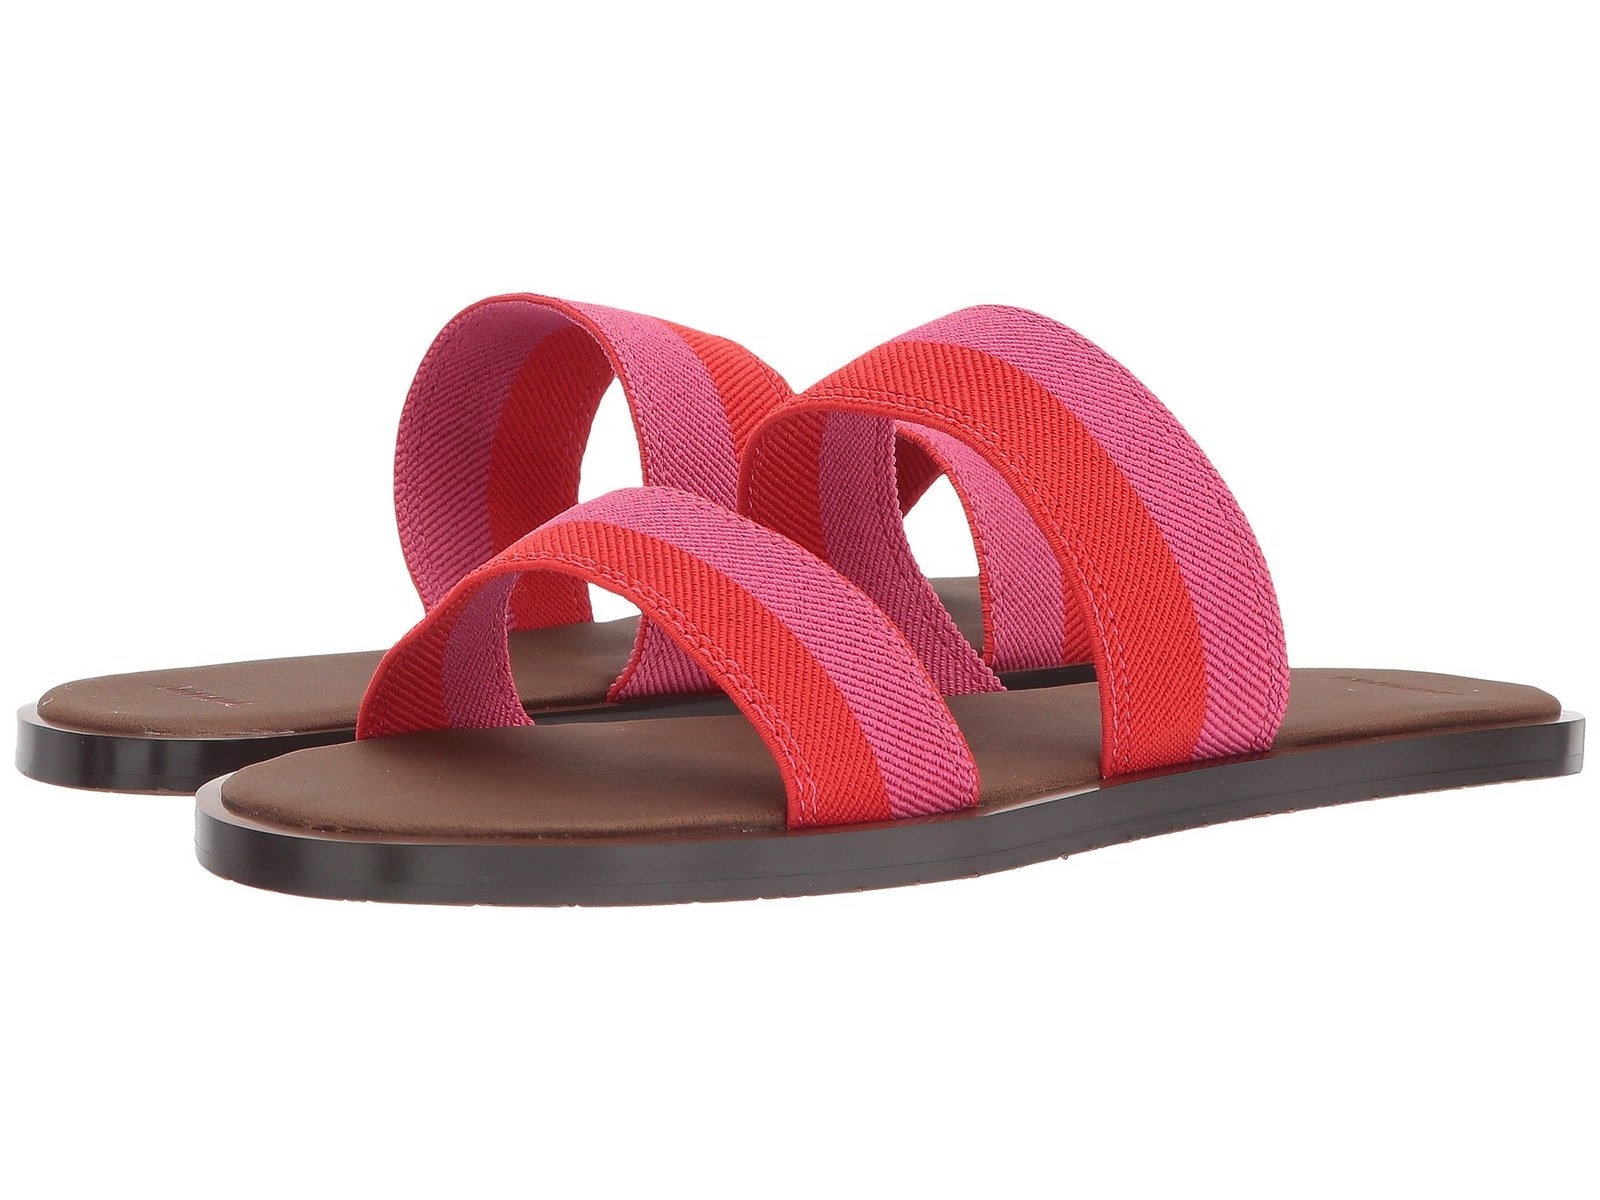 Buy > zappos strappy sandals > in stock